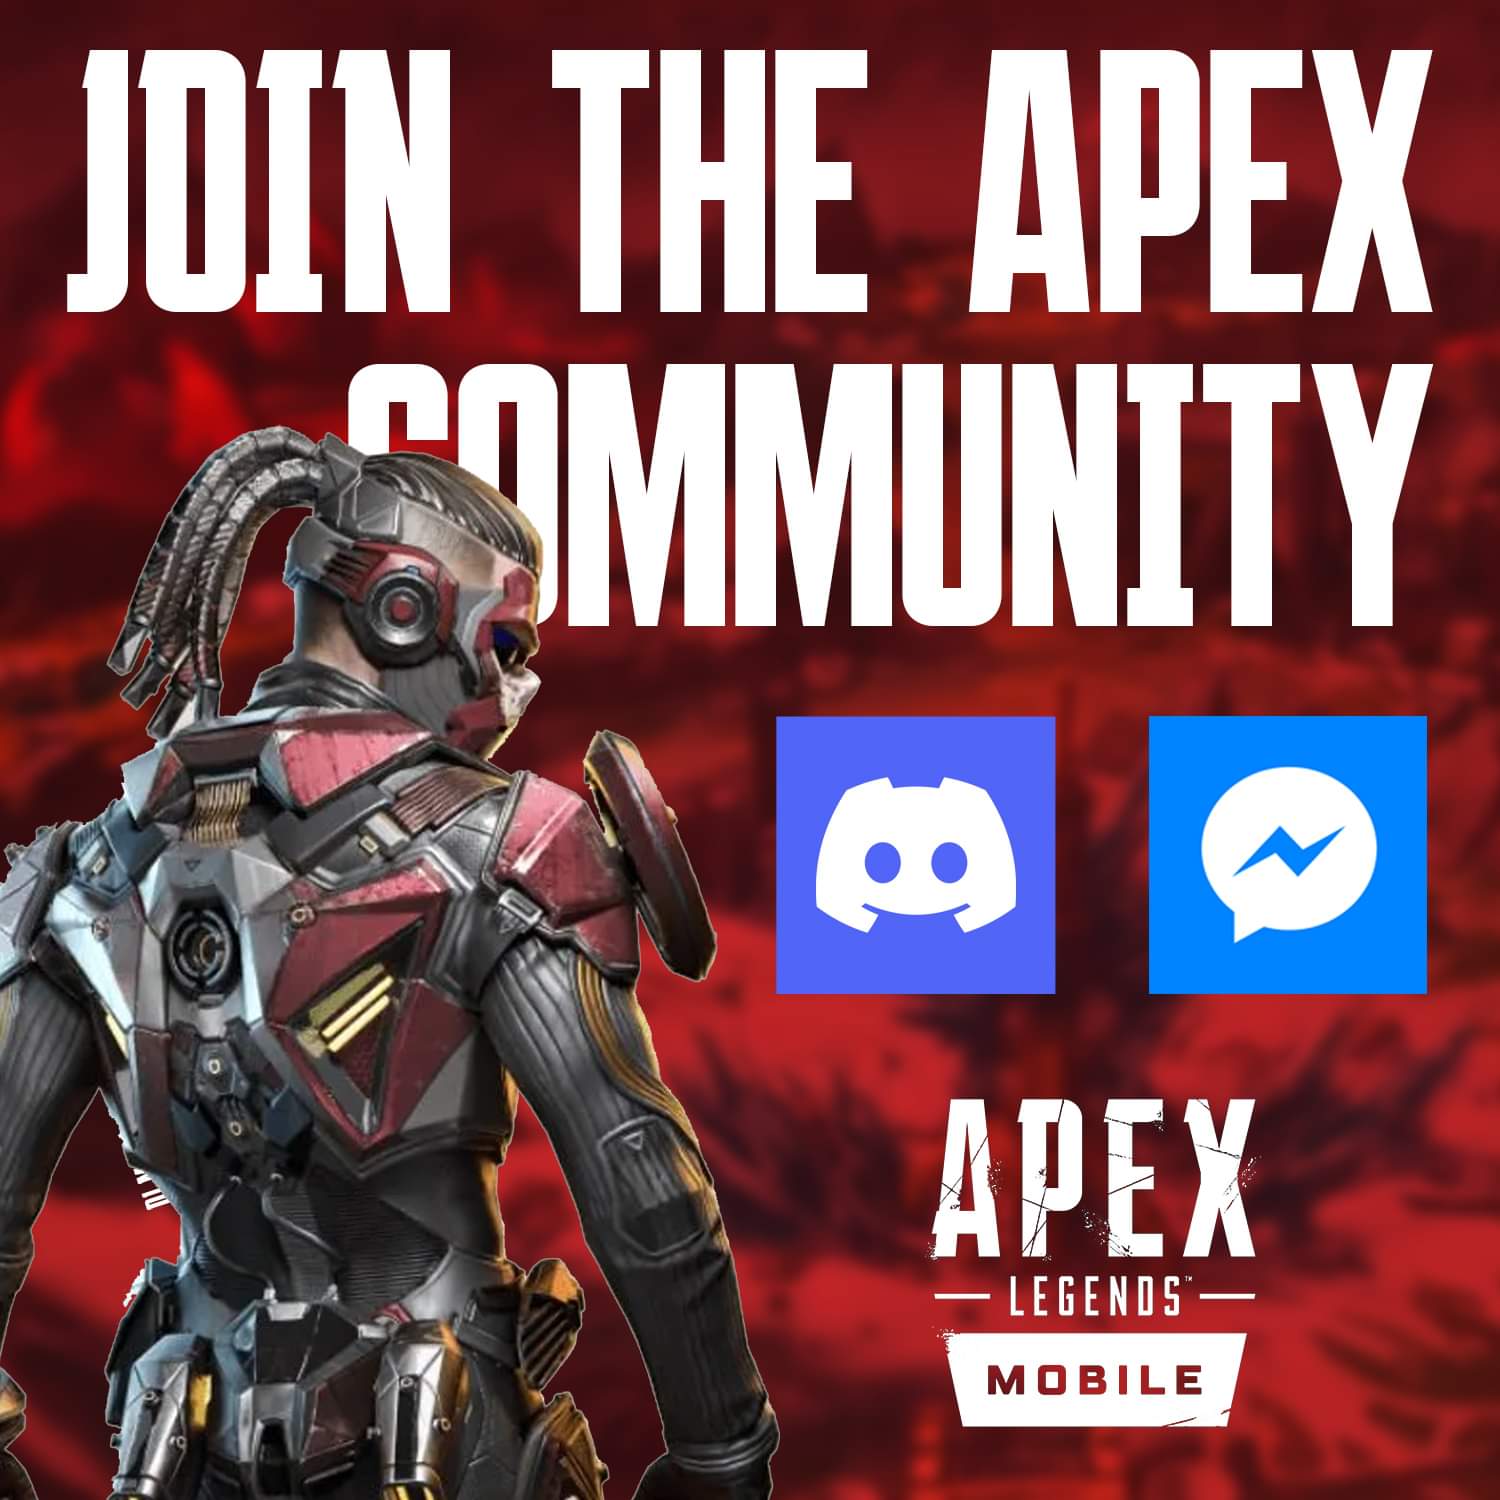 Apex Legends Mobile Now Available for Download in the Philippines